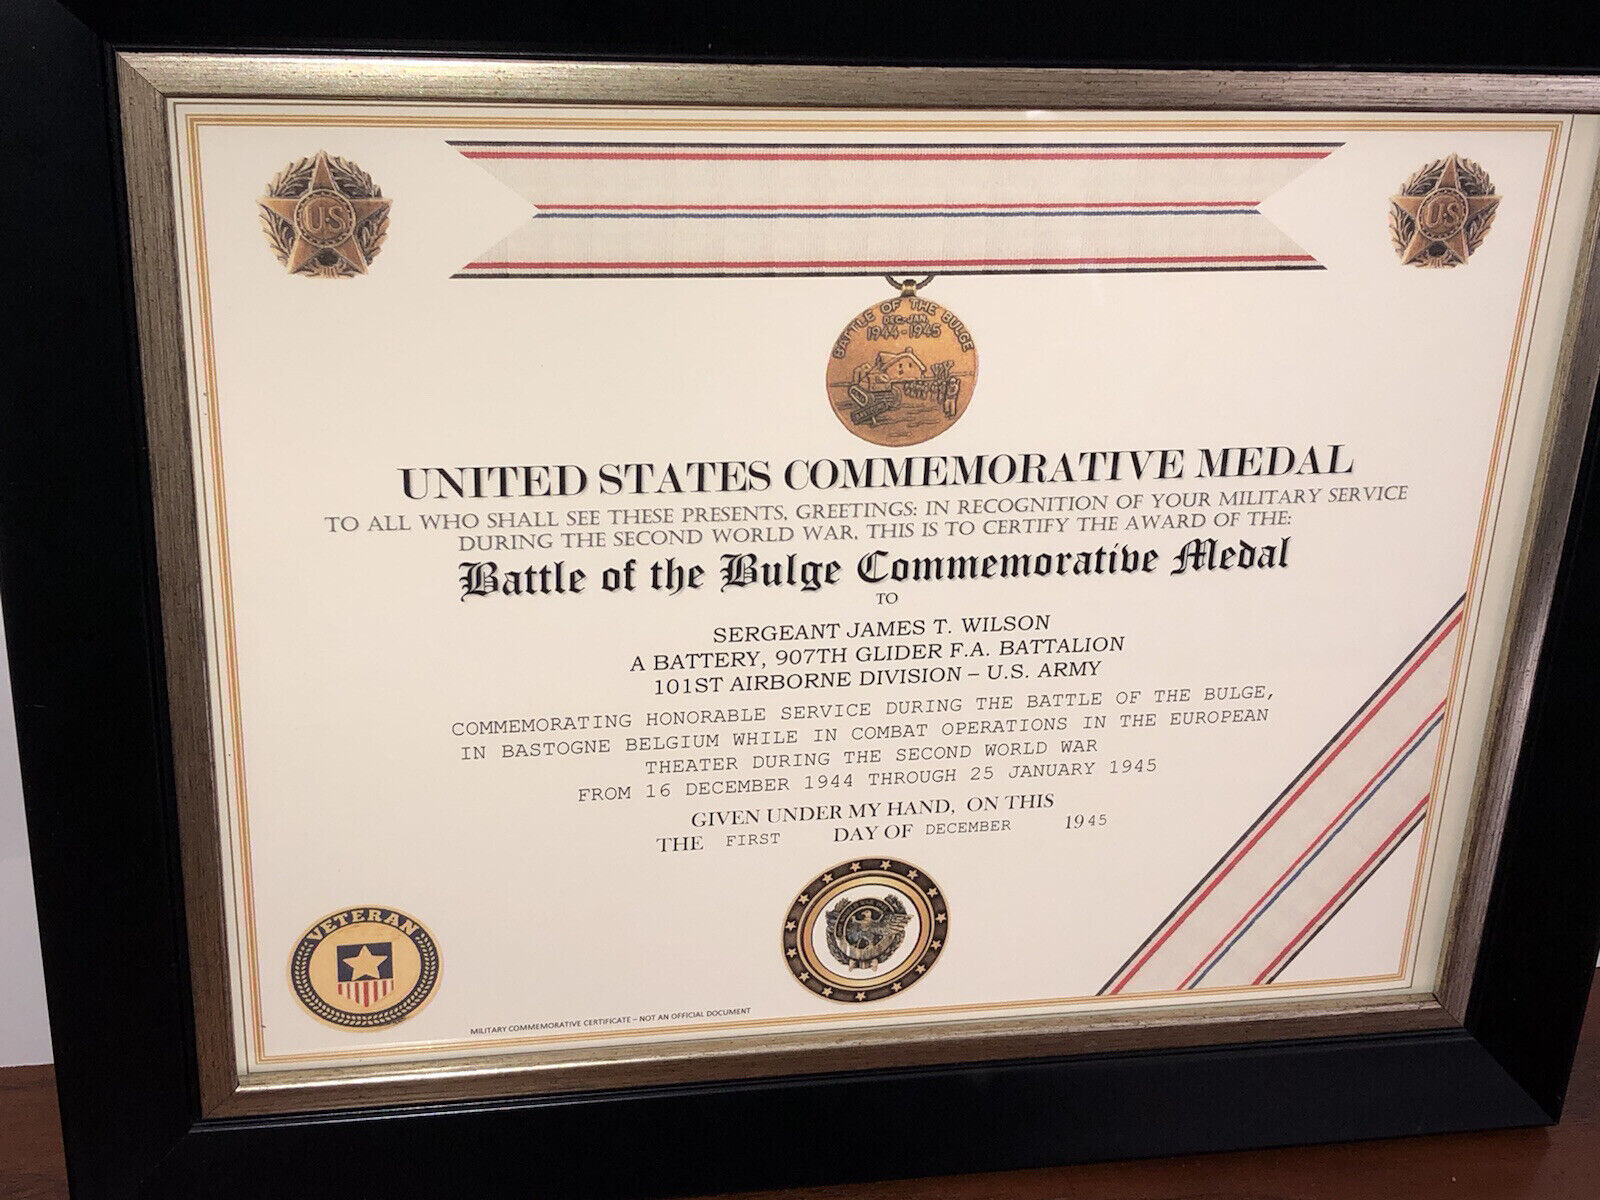 WW2 - BATTLE OF THE BULGE COMMEMORATIVE MEDAL CERTIFICATE ~ Type 1